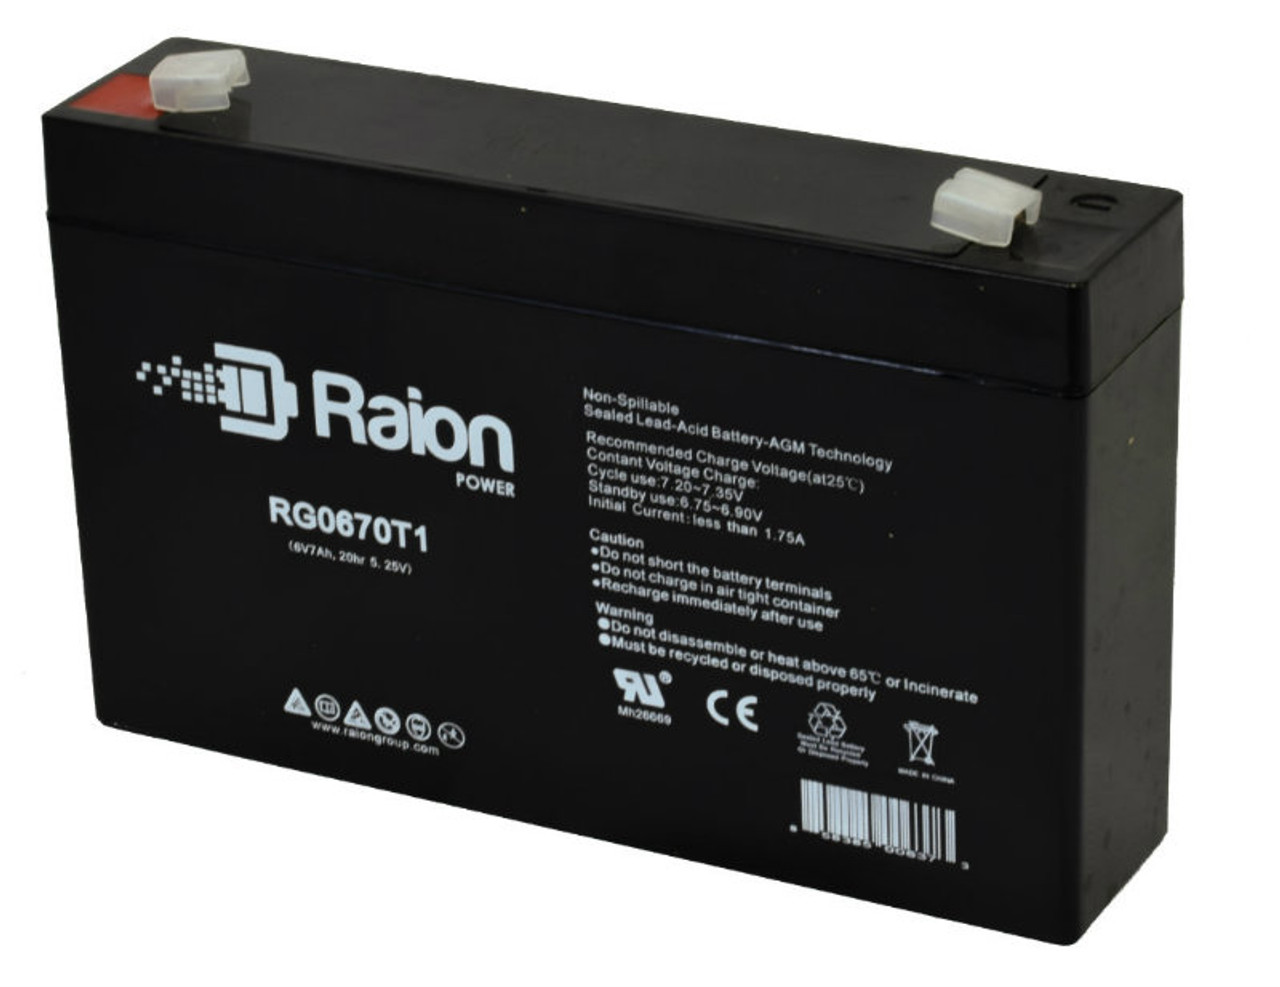 Raion Power RG0670T1 6V 7Ah Replacement Battery Cartridge for Liven LV7.0-6